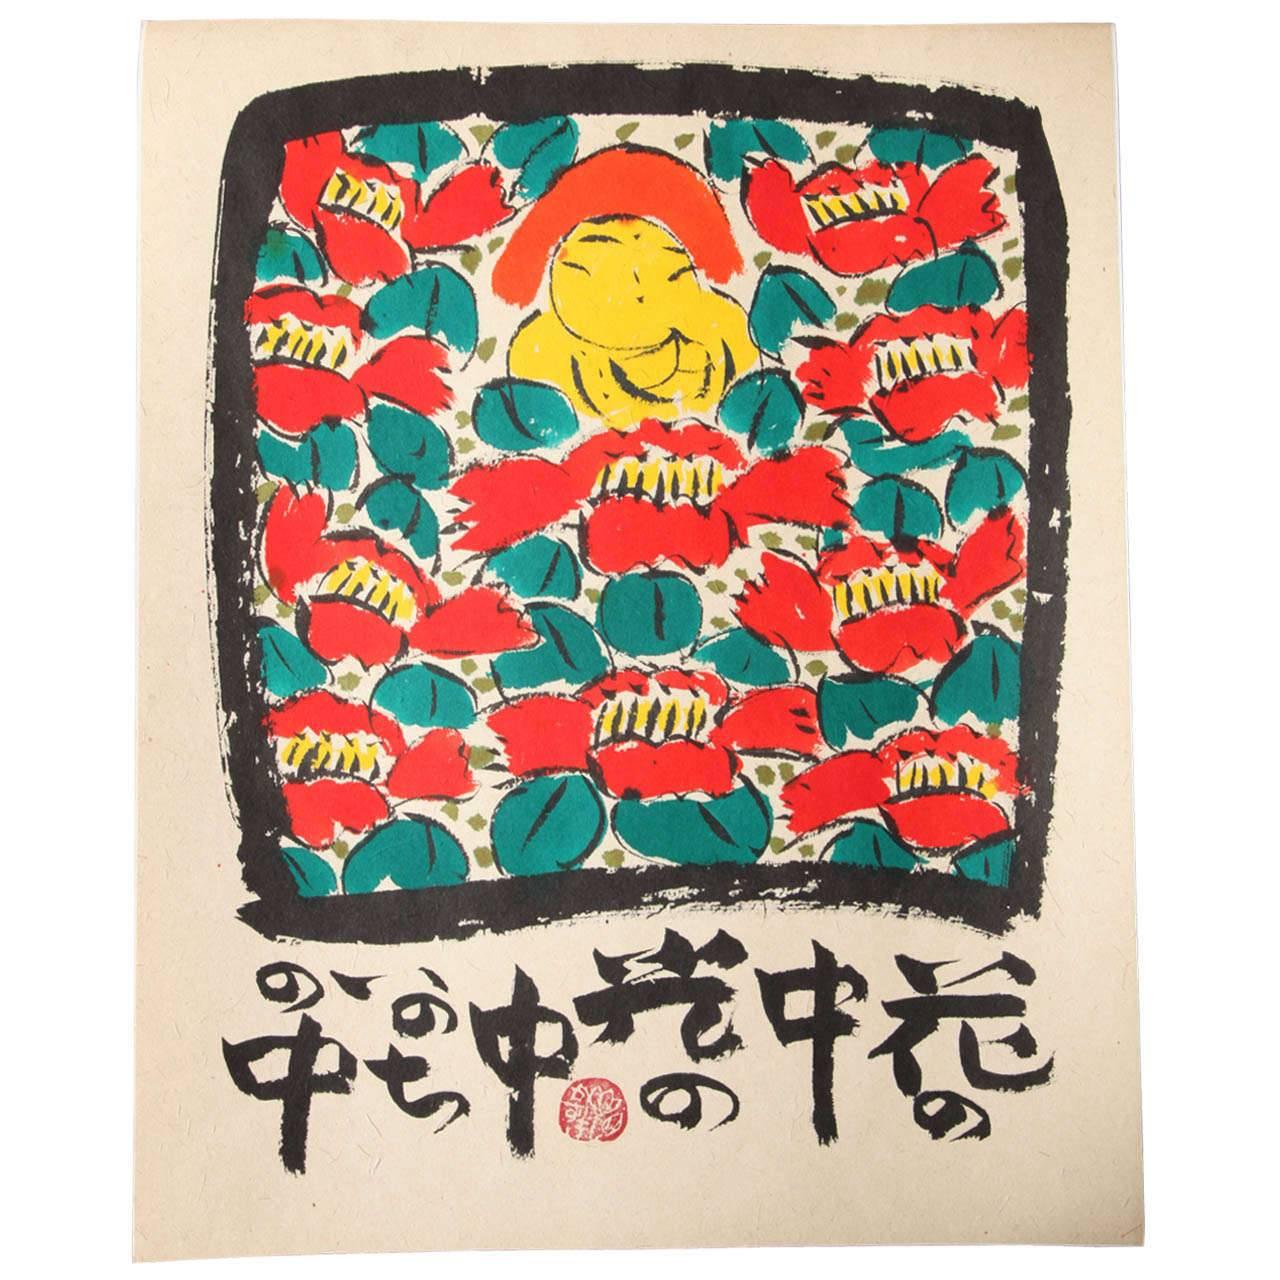 The happy and powerful piece of art is painted in contemporary style with a twist and more. This Japanese work of art is very playful and colorful. The painting has vibrant red, yellow and green watercolors. Complemented with black Indian ink on